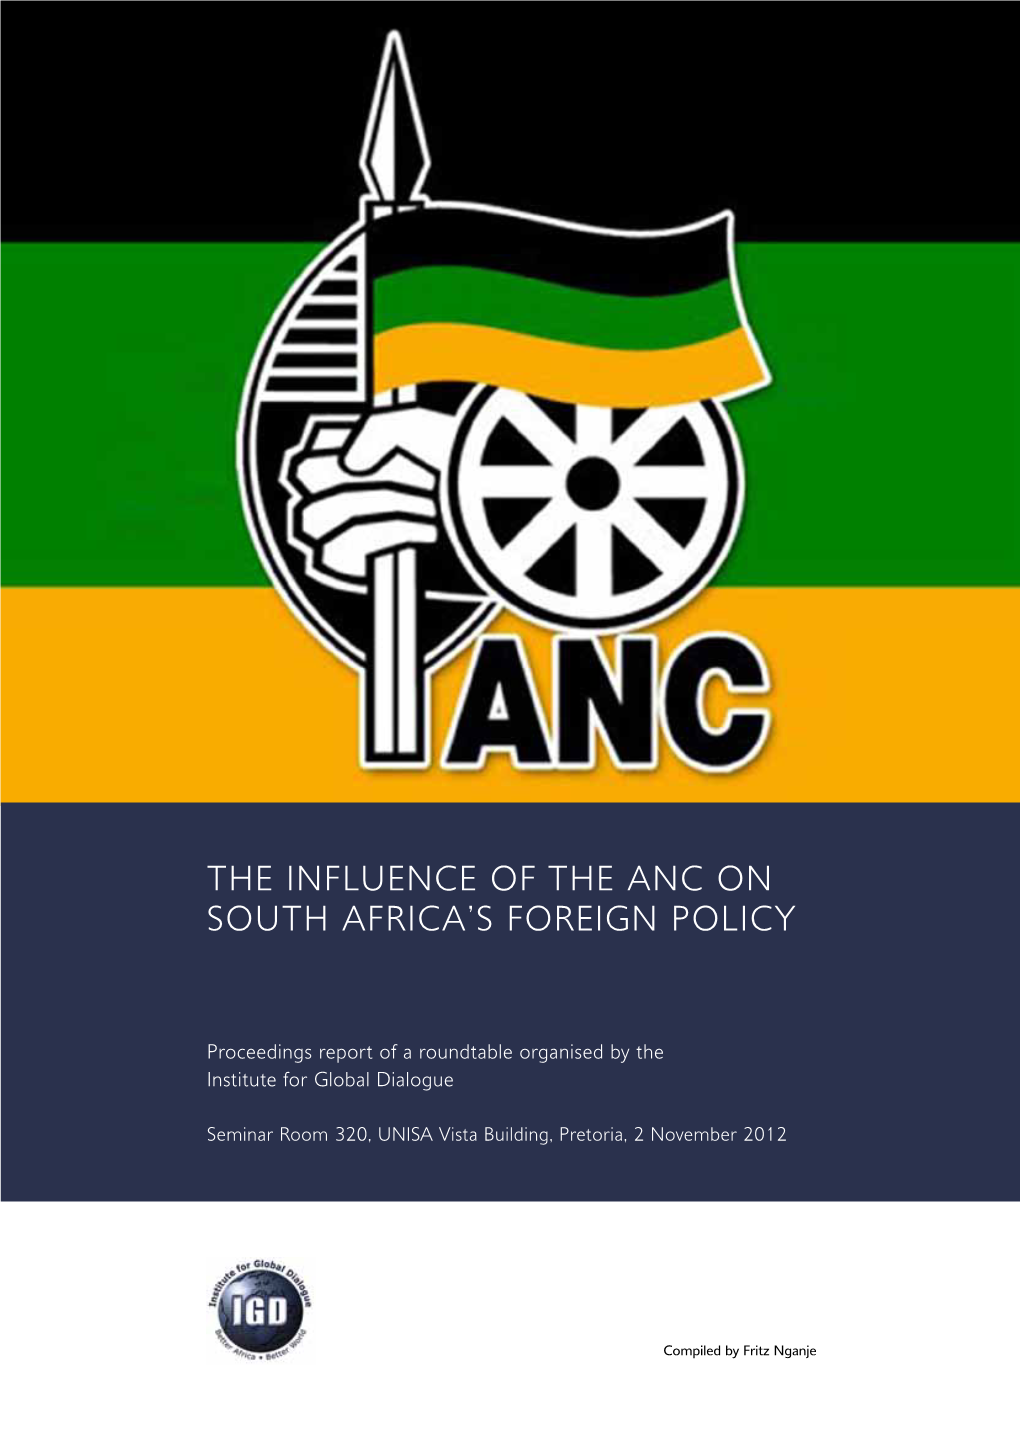 The Influence of the Anc on South Africa's Foreign Policy